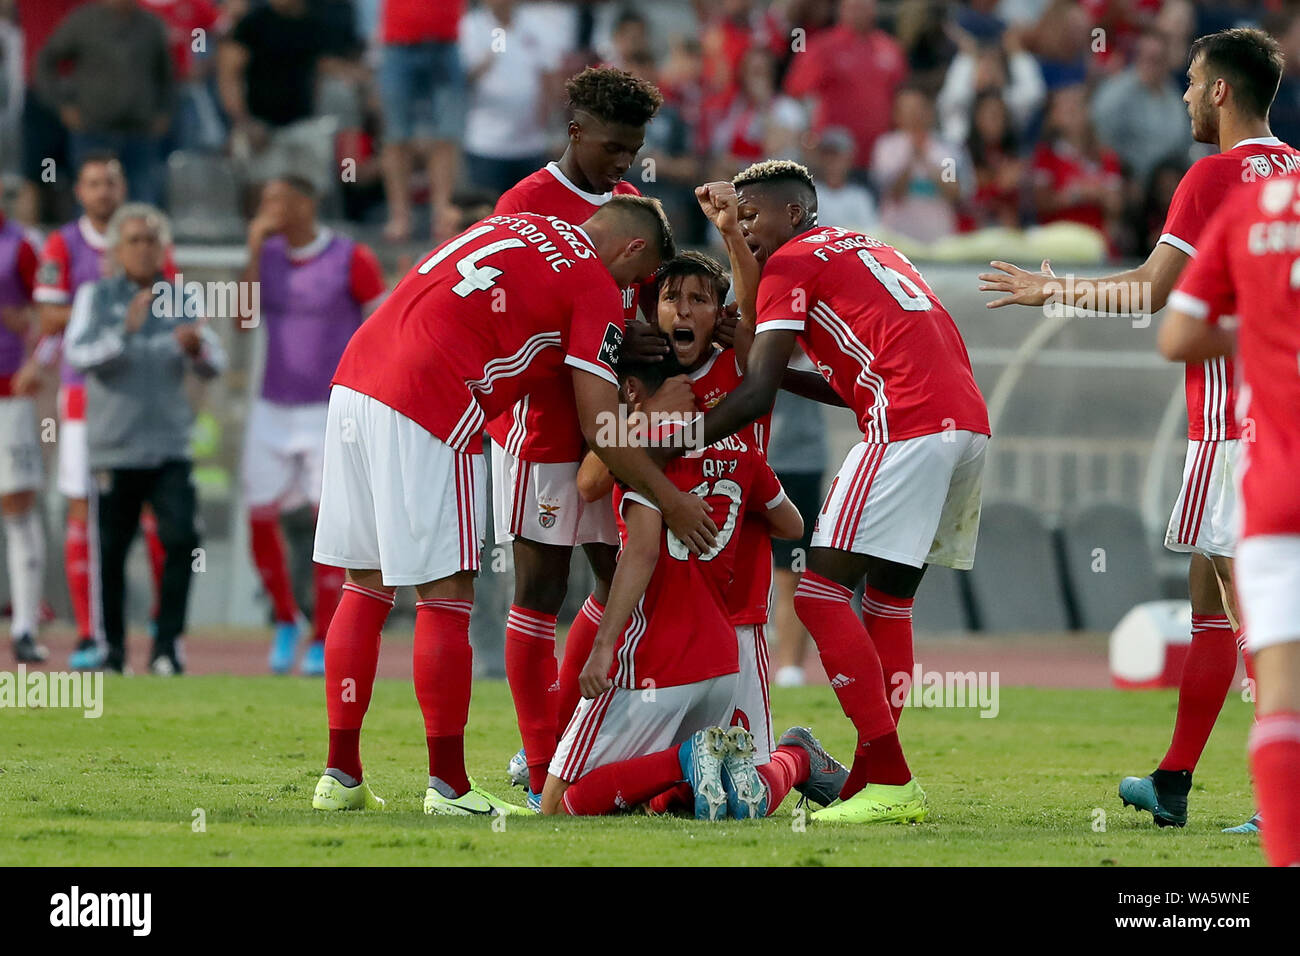 Oeiras, Portugal. 17th Aug, 2019. Rafa Silva (C) of SL Benfica celebrates with teammates after scoring during the Portuguese league football match between Belenenses SAD and SL Benfica at the Jamor stadium in Oeiras, Portugal, on Aug. 17, 2019. Credit: Pedro Fiuza/Xinhua Stock Photo